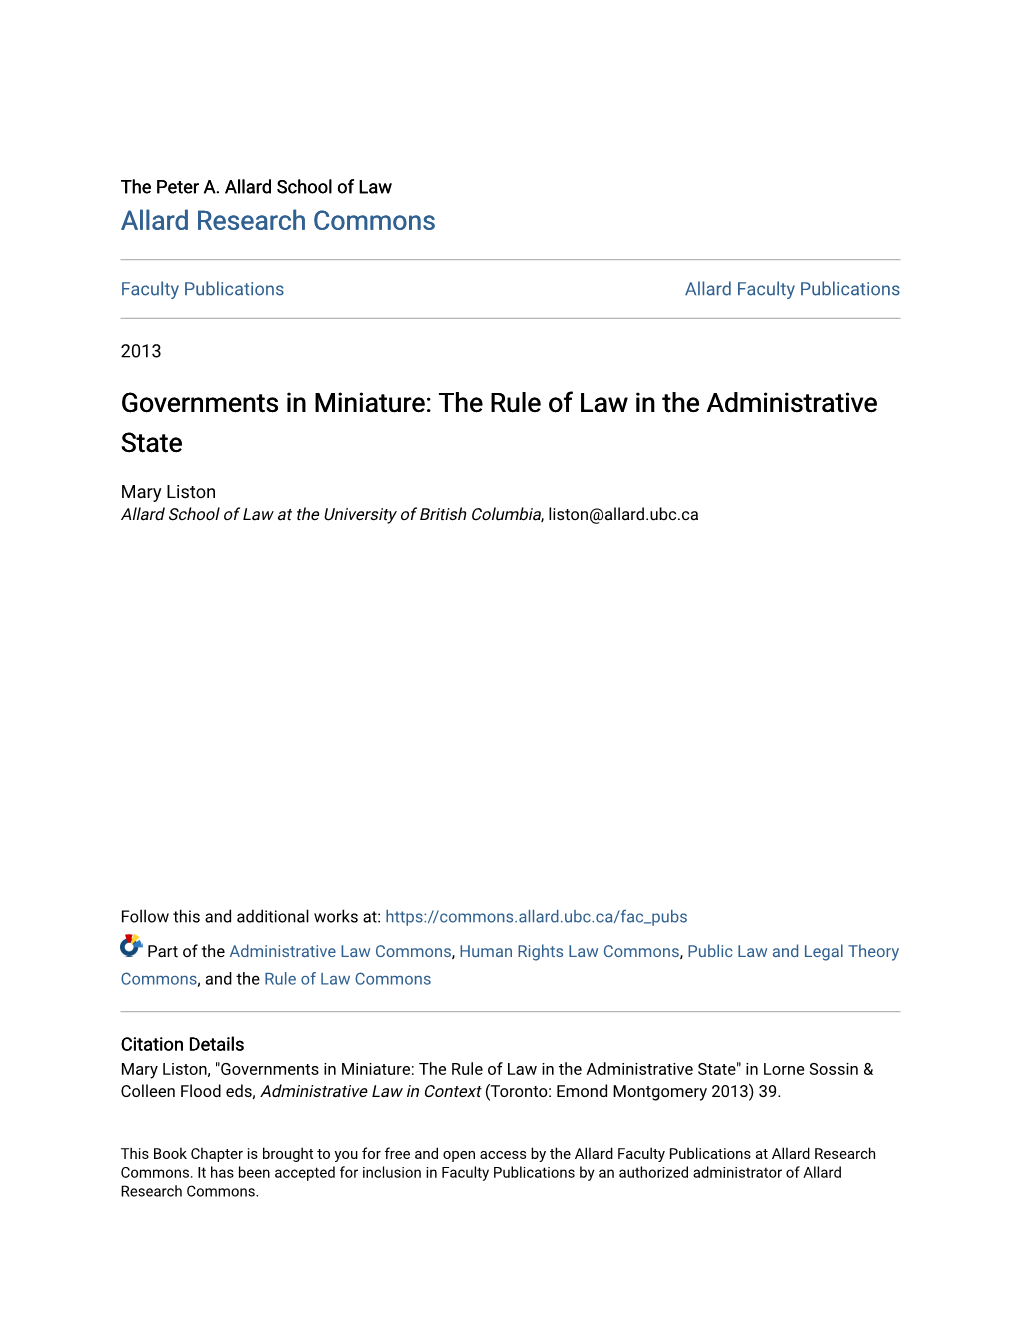 The Rule of Law in the Administrative State